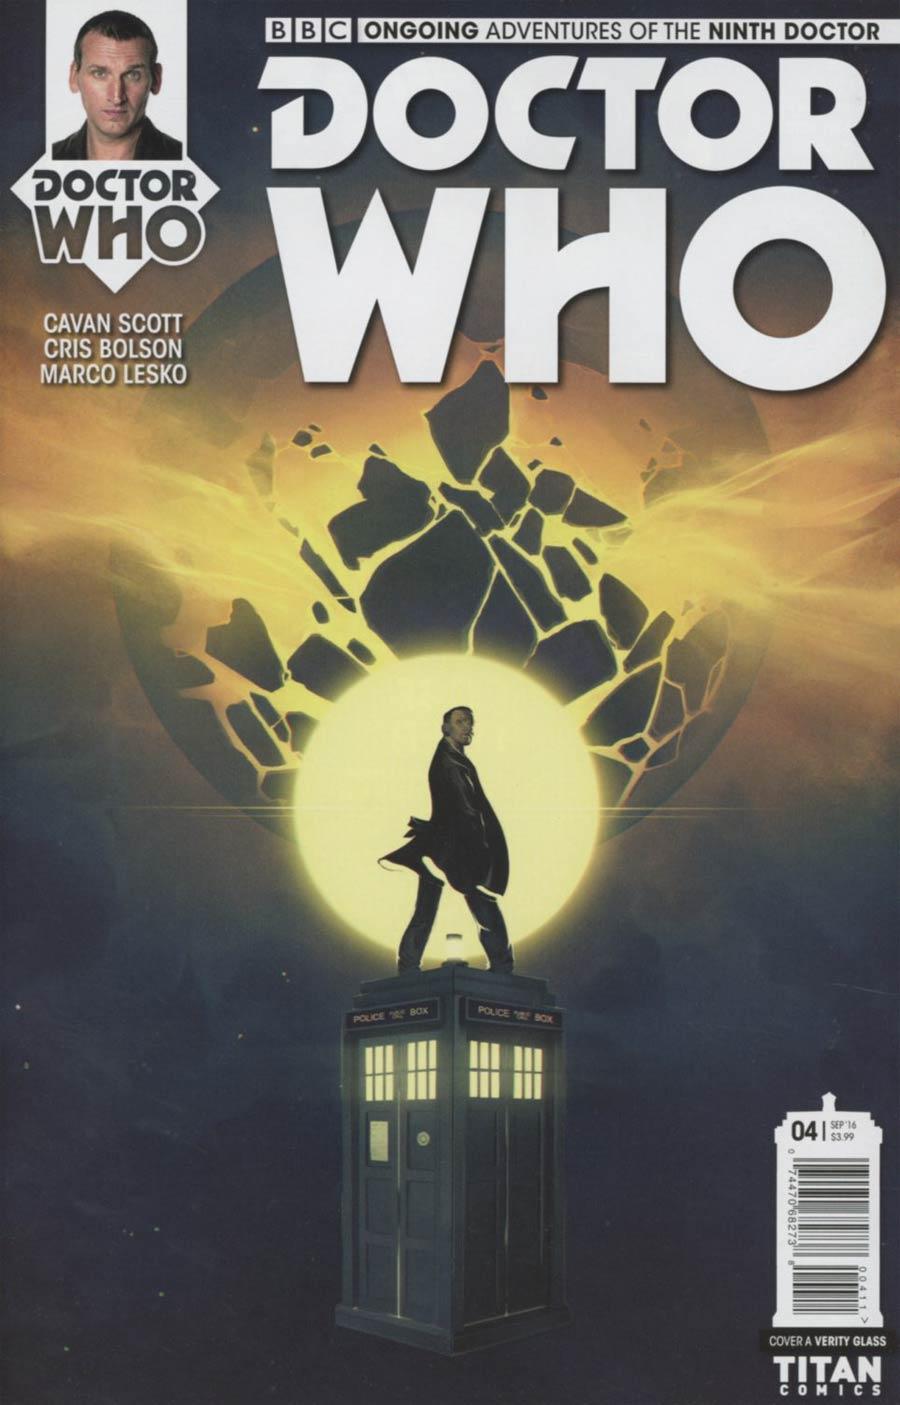 Doctor Who 9th Doctor Vol. 2 #4